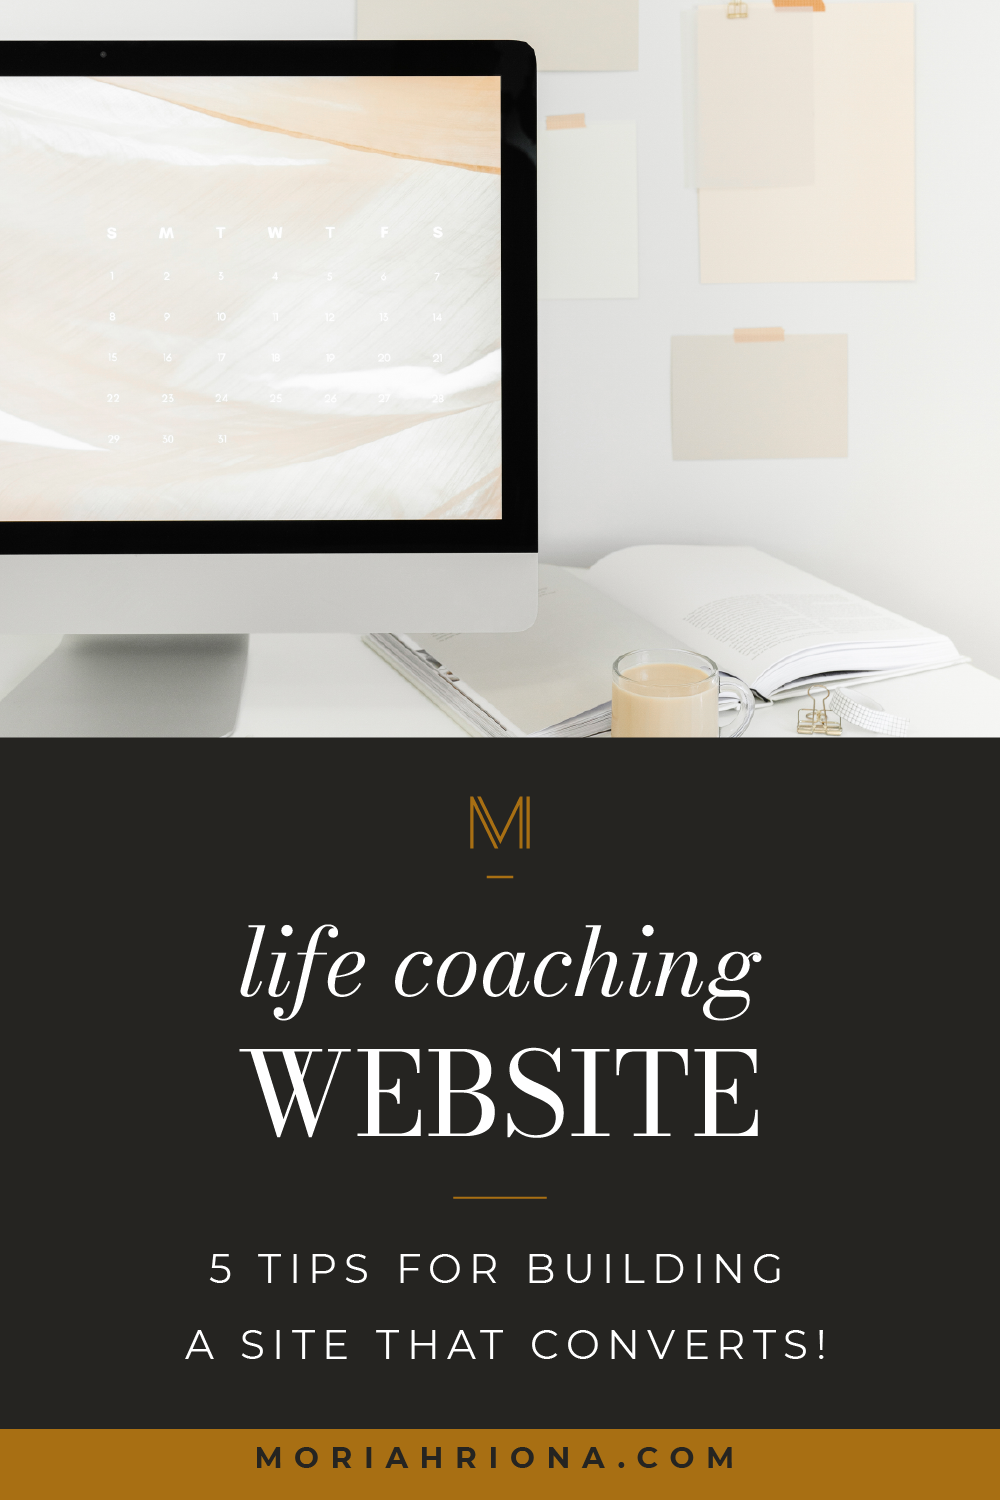 Are you wondering what goes on a homepage for your coaching or consulting business? Then this blog post is for you! I’m sharing my best homepage design tips so your website can start attracting your dreamiest leads and converting them into paying clients. #luxurybrand #webdesign #webdesigntips #lifecoach